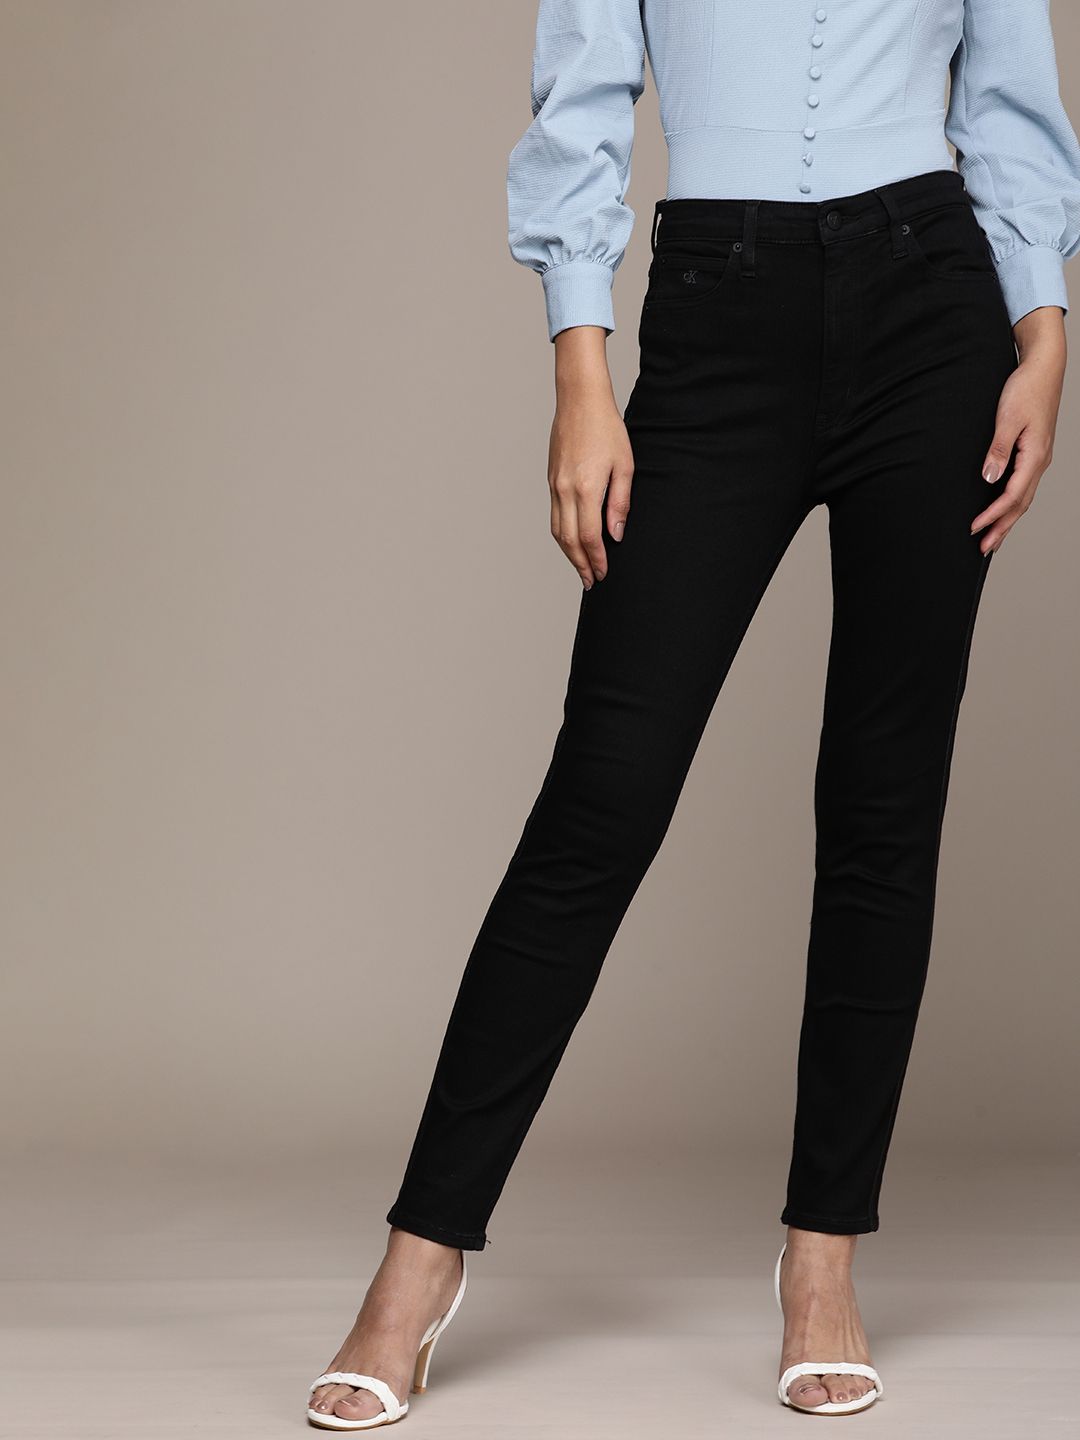 Calvin Klein Jeans Women Black Skinny Fit High-Rise Stretchable Casual Jeans Price in India